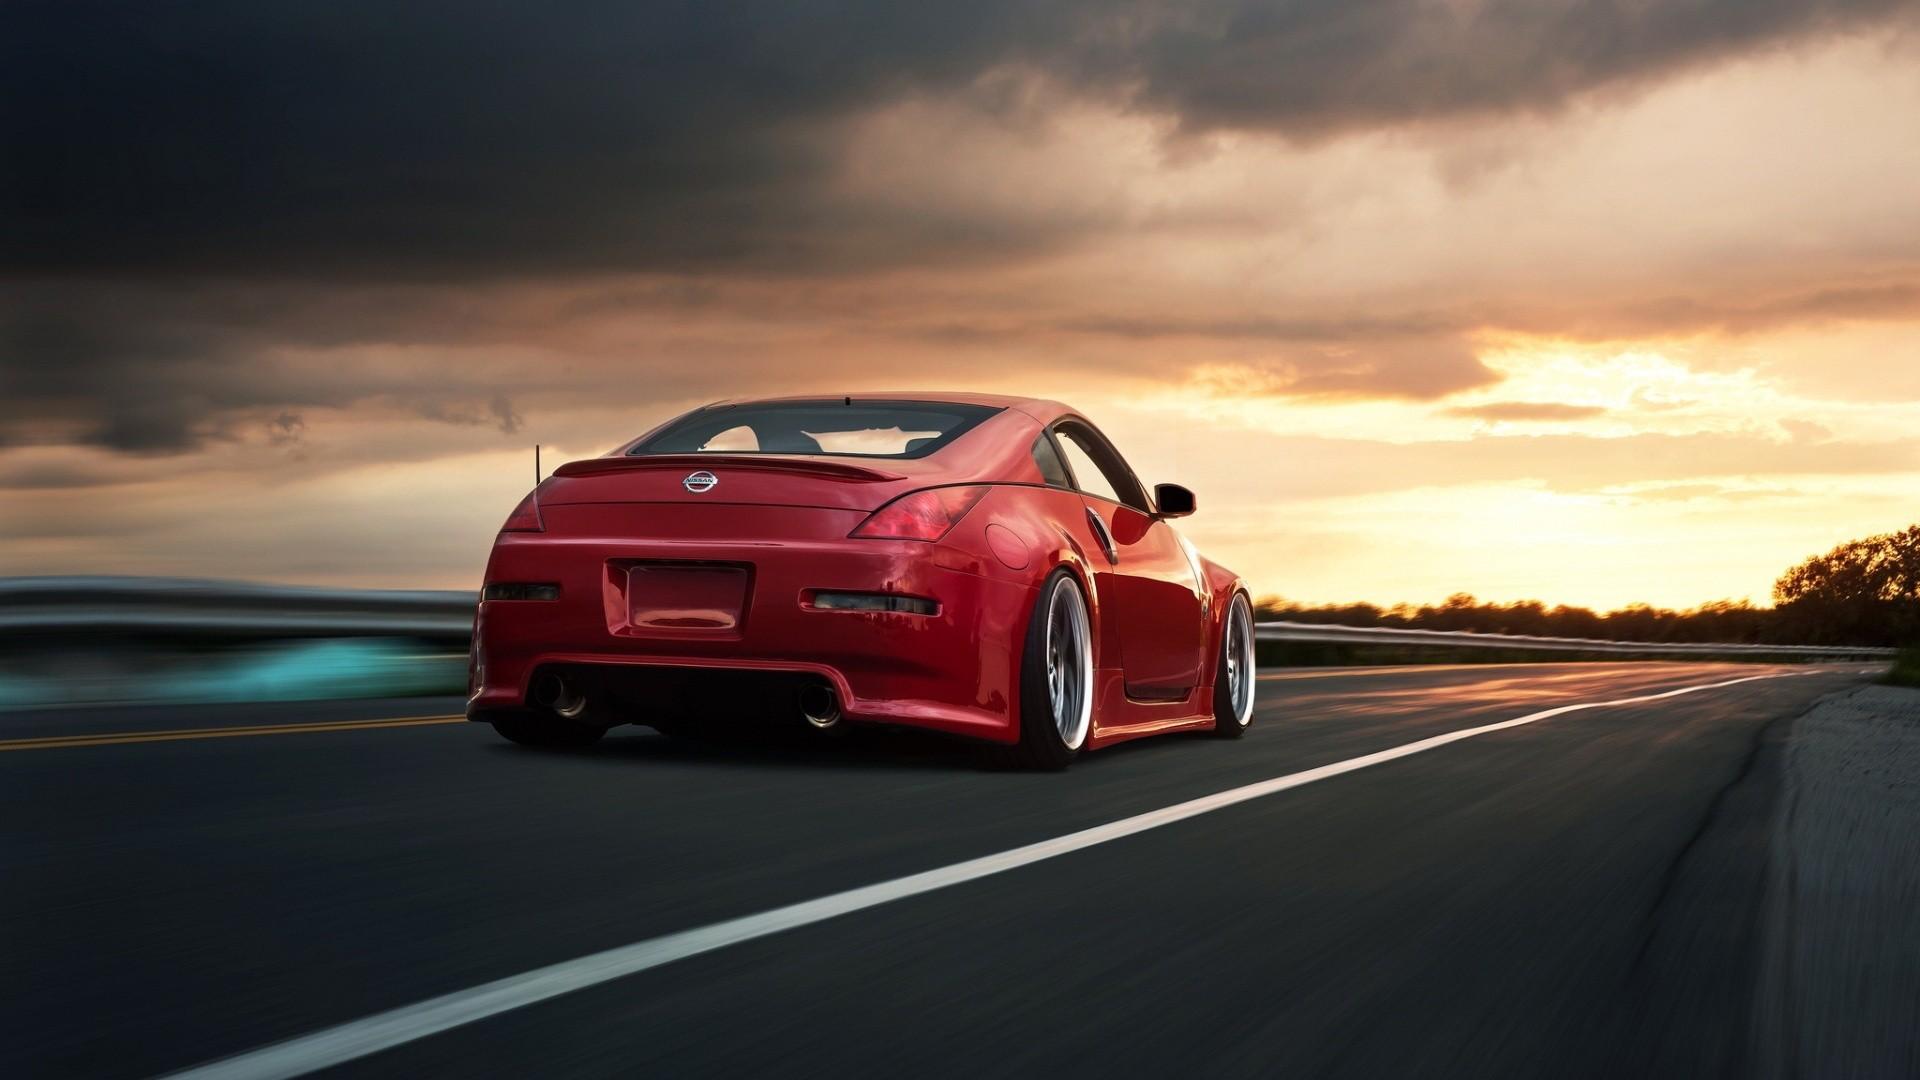 Wallpaper, 1920x1080 px, car, Nissan 350Z, red cars, Stance